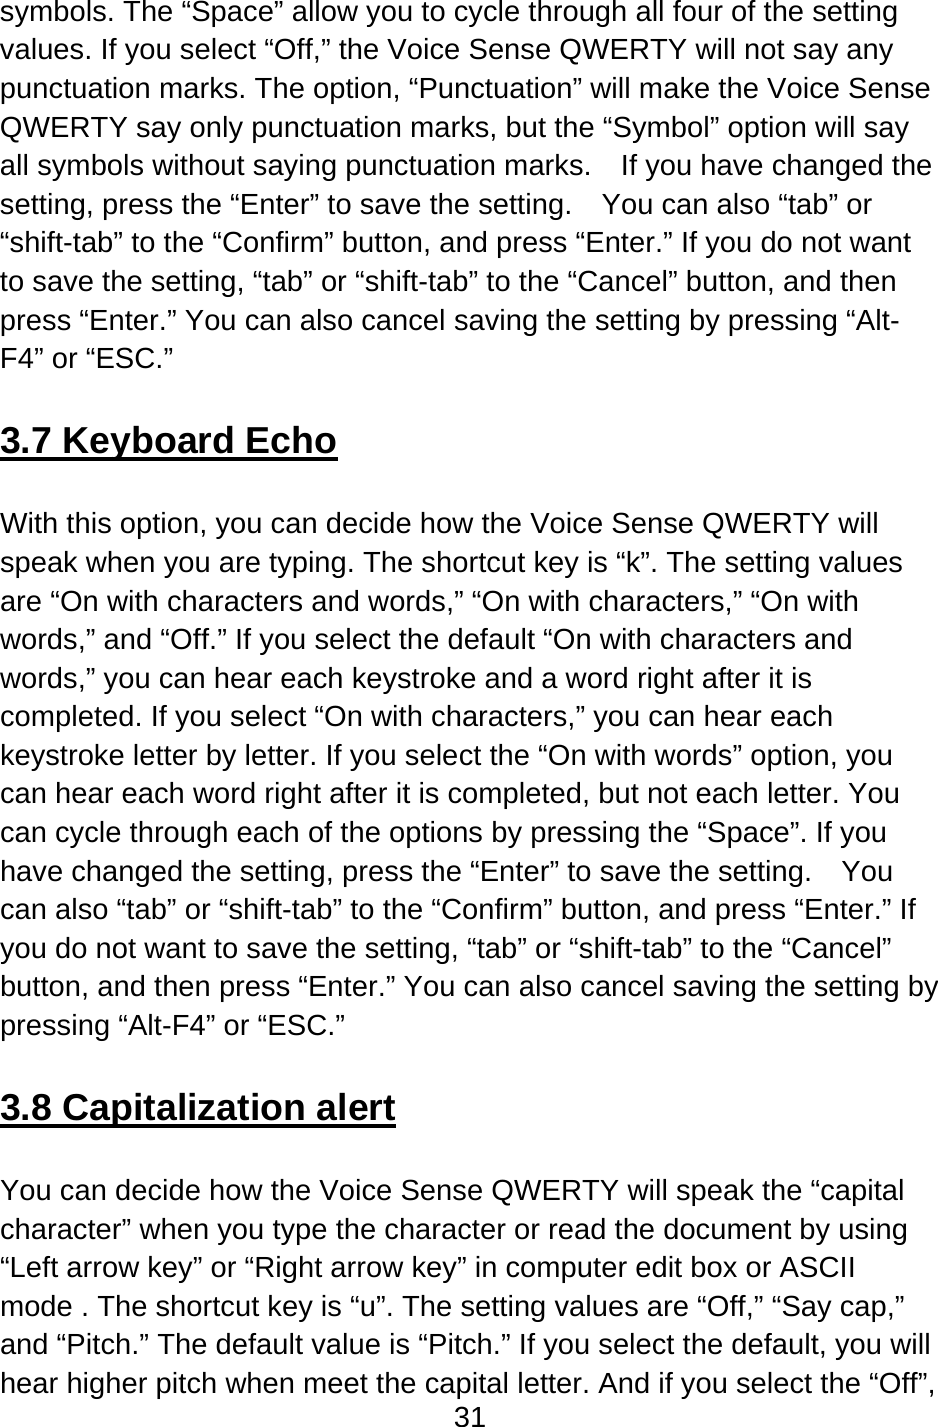 31  symbols. The “Space” allow you to cycle through all four of the setting values. If you select “Off,” the Voice Sense QWERTY will not say any punctuation marks. The option, “Punctuation” will make the Voice Sense QWERTY say only punctuation marks, but the “Symbol” option will say all symbols without saying punctuation marks.    If you have changed the setting, press the “Enter” to save the setting.    You can also “tab” or “shift-tab” to the “Confirm” button, and press “Enter.” If you do not want to save the setting, “tab” or “shift-tab” to the “Cancel” button, and then press “Enter.” You can also cancel saving the setting by pressing “Alt-F4” or “ESC.”  3.7 Keyboard Echo  With this option, you can decide how the Voice Sense QWERTY will speak when you are typing. The shortcut key is “k”. The setting values are “On with characters and words,” “On with characters,” “On with words,” and “Off.” If you select the default “On with characters and words,” you can hear each keystroke and a word right after it is completed. If you select “On with characters,” you can hear each keystroke letter by letter. If you select the “On with words” option, you can hear each word right after it is completed, but not each letter. You can cycle through each of the options by pressing the “Space”. If you have changed the setting, press the “Enter” to save the setting.    You can also “tab” or “shift-tab” to the “Confirm” button, and press “Enter.” If you do not want to save the setting, “tab” or “shift-tab” to the “Cancel” button, and then press “Enter.” You can also cancel saving the setting by pressing “Alt-F4” or “ESC.”  3.8 Capitalization alert  You can decide how the Voice Sense QWERTY will speak the “capital character” when you type the character or read the document by using “Left arrow key” or “Right arrow key” in computer edit box or ASCII mode . The shortcut key is “u”. The setting values are “Off,” “Say cap,” and “Pitch.” The default value is “Pitch.” If you select the default, you will hear higher pitch when meet the capital letter. And if you select the “Off”, 